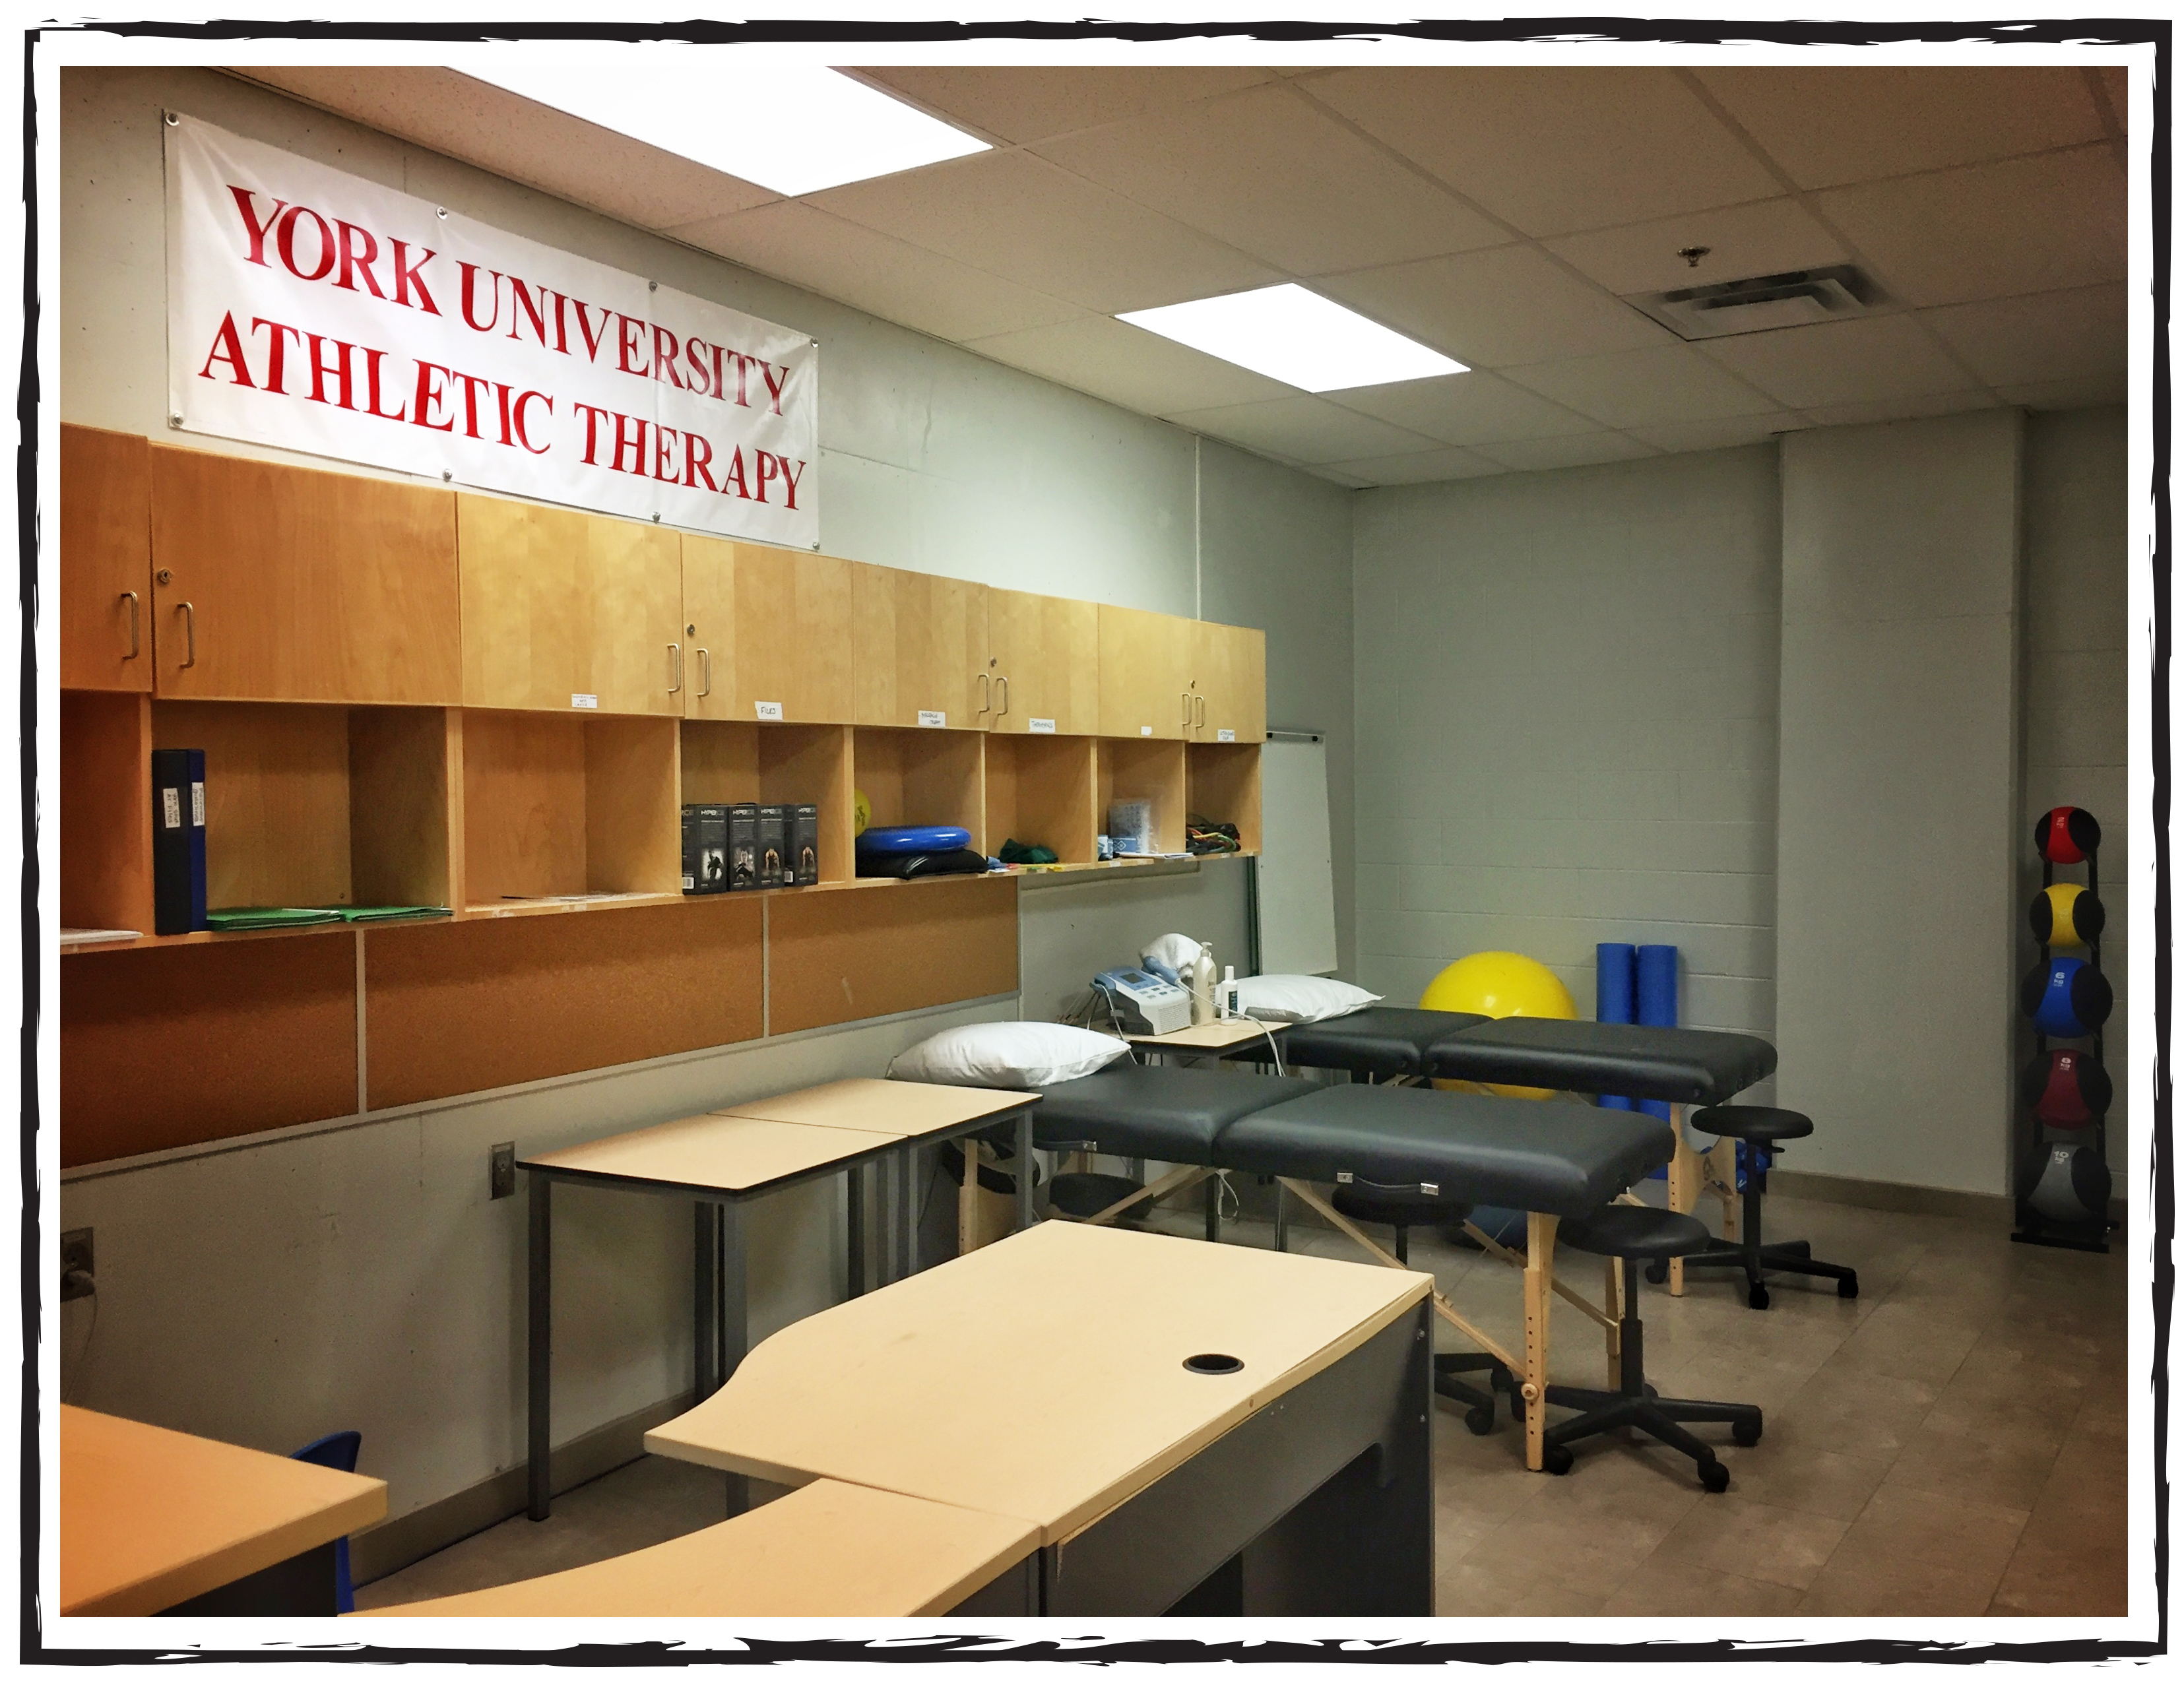 York University Atheltic Therapy Centre